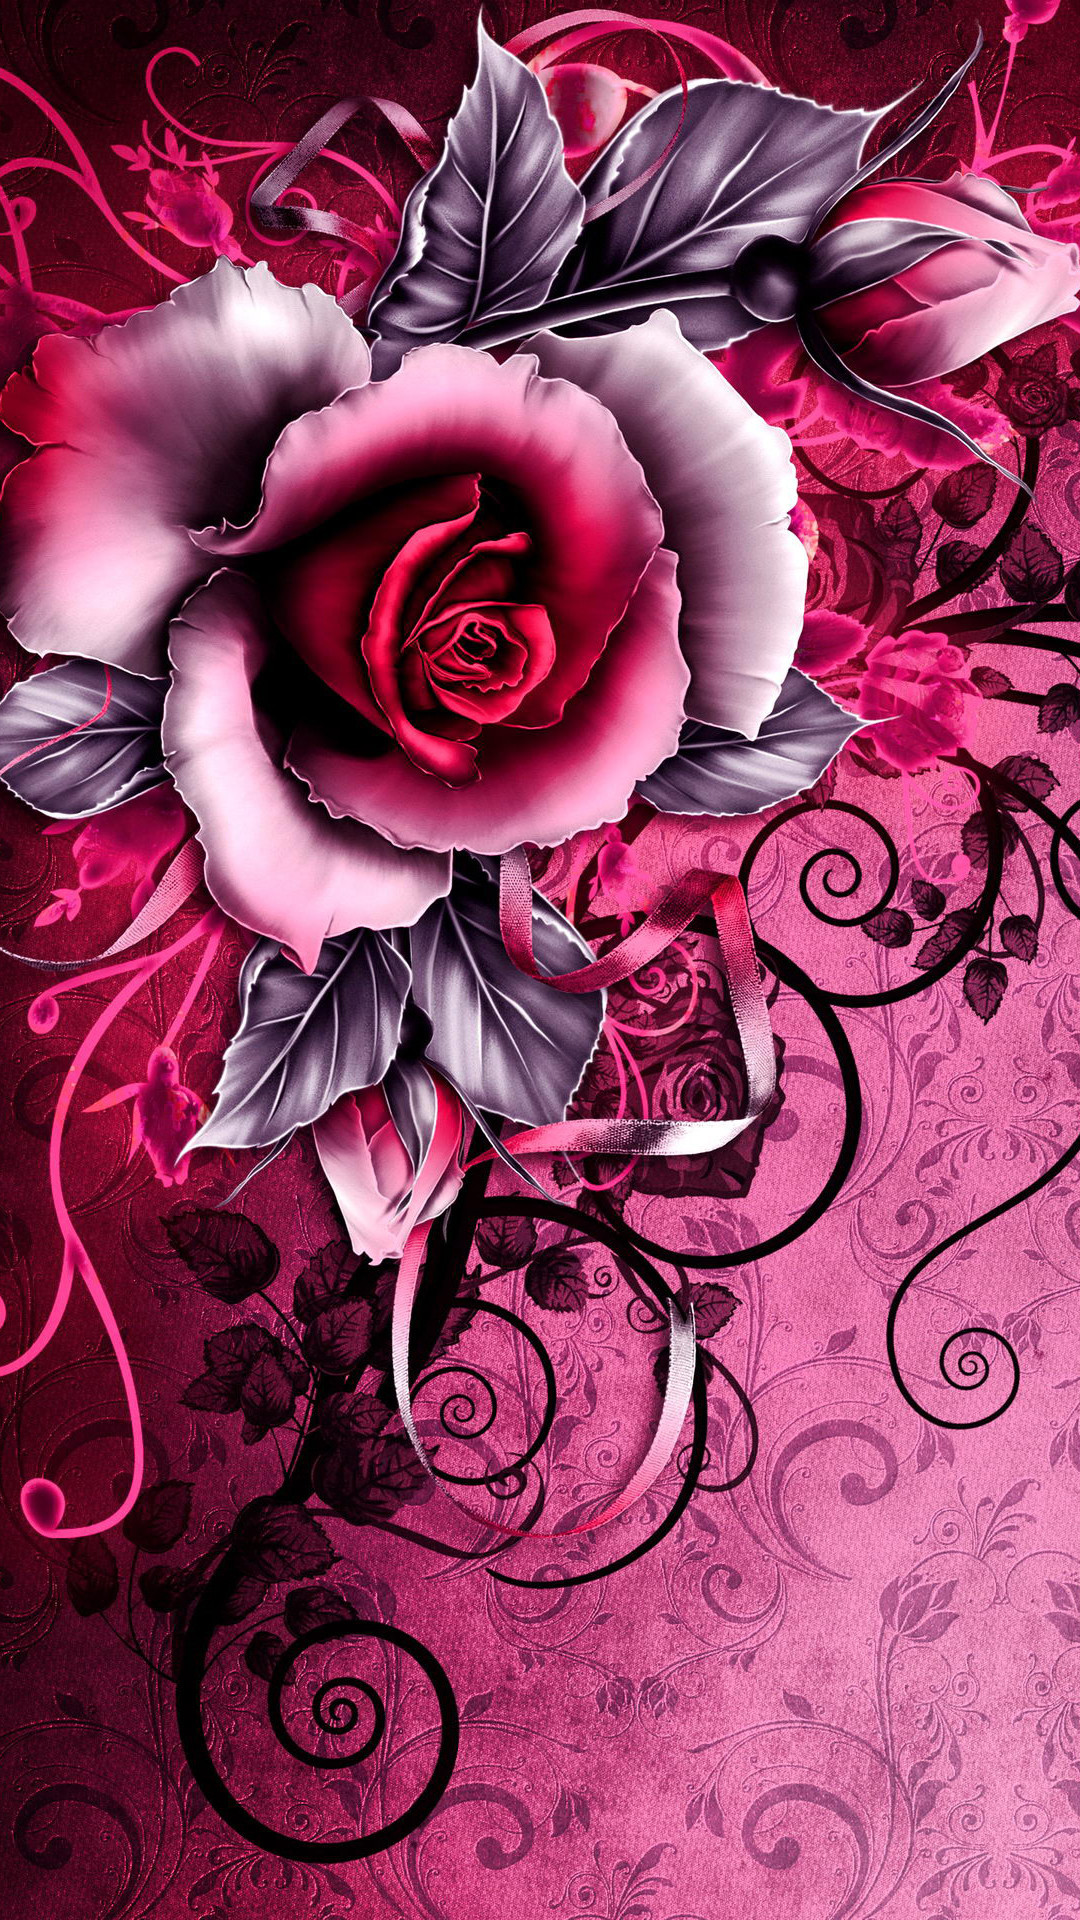 1080x1920 37 Wonderful Black Wallpaper with Pink Roses